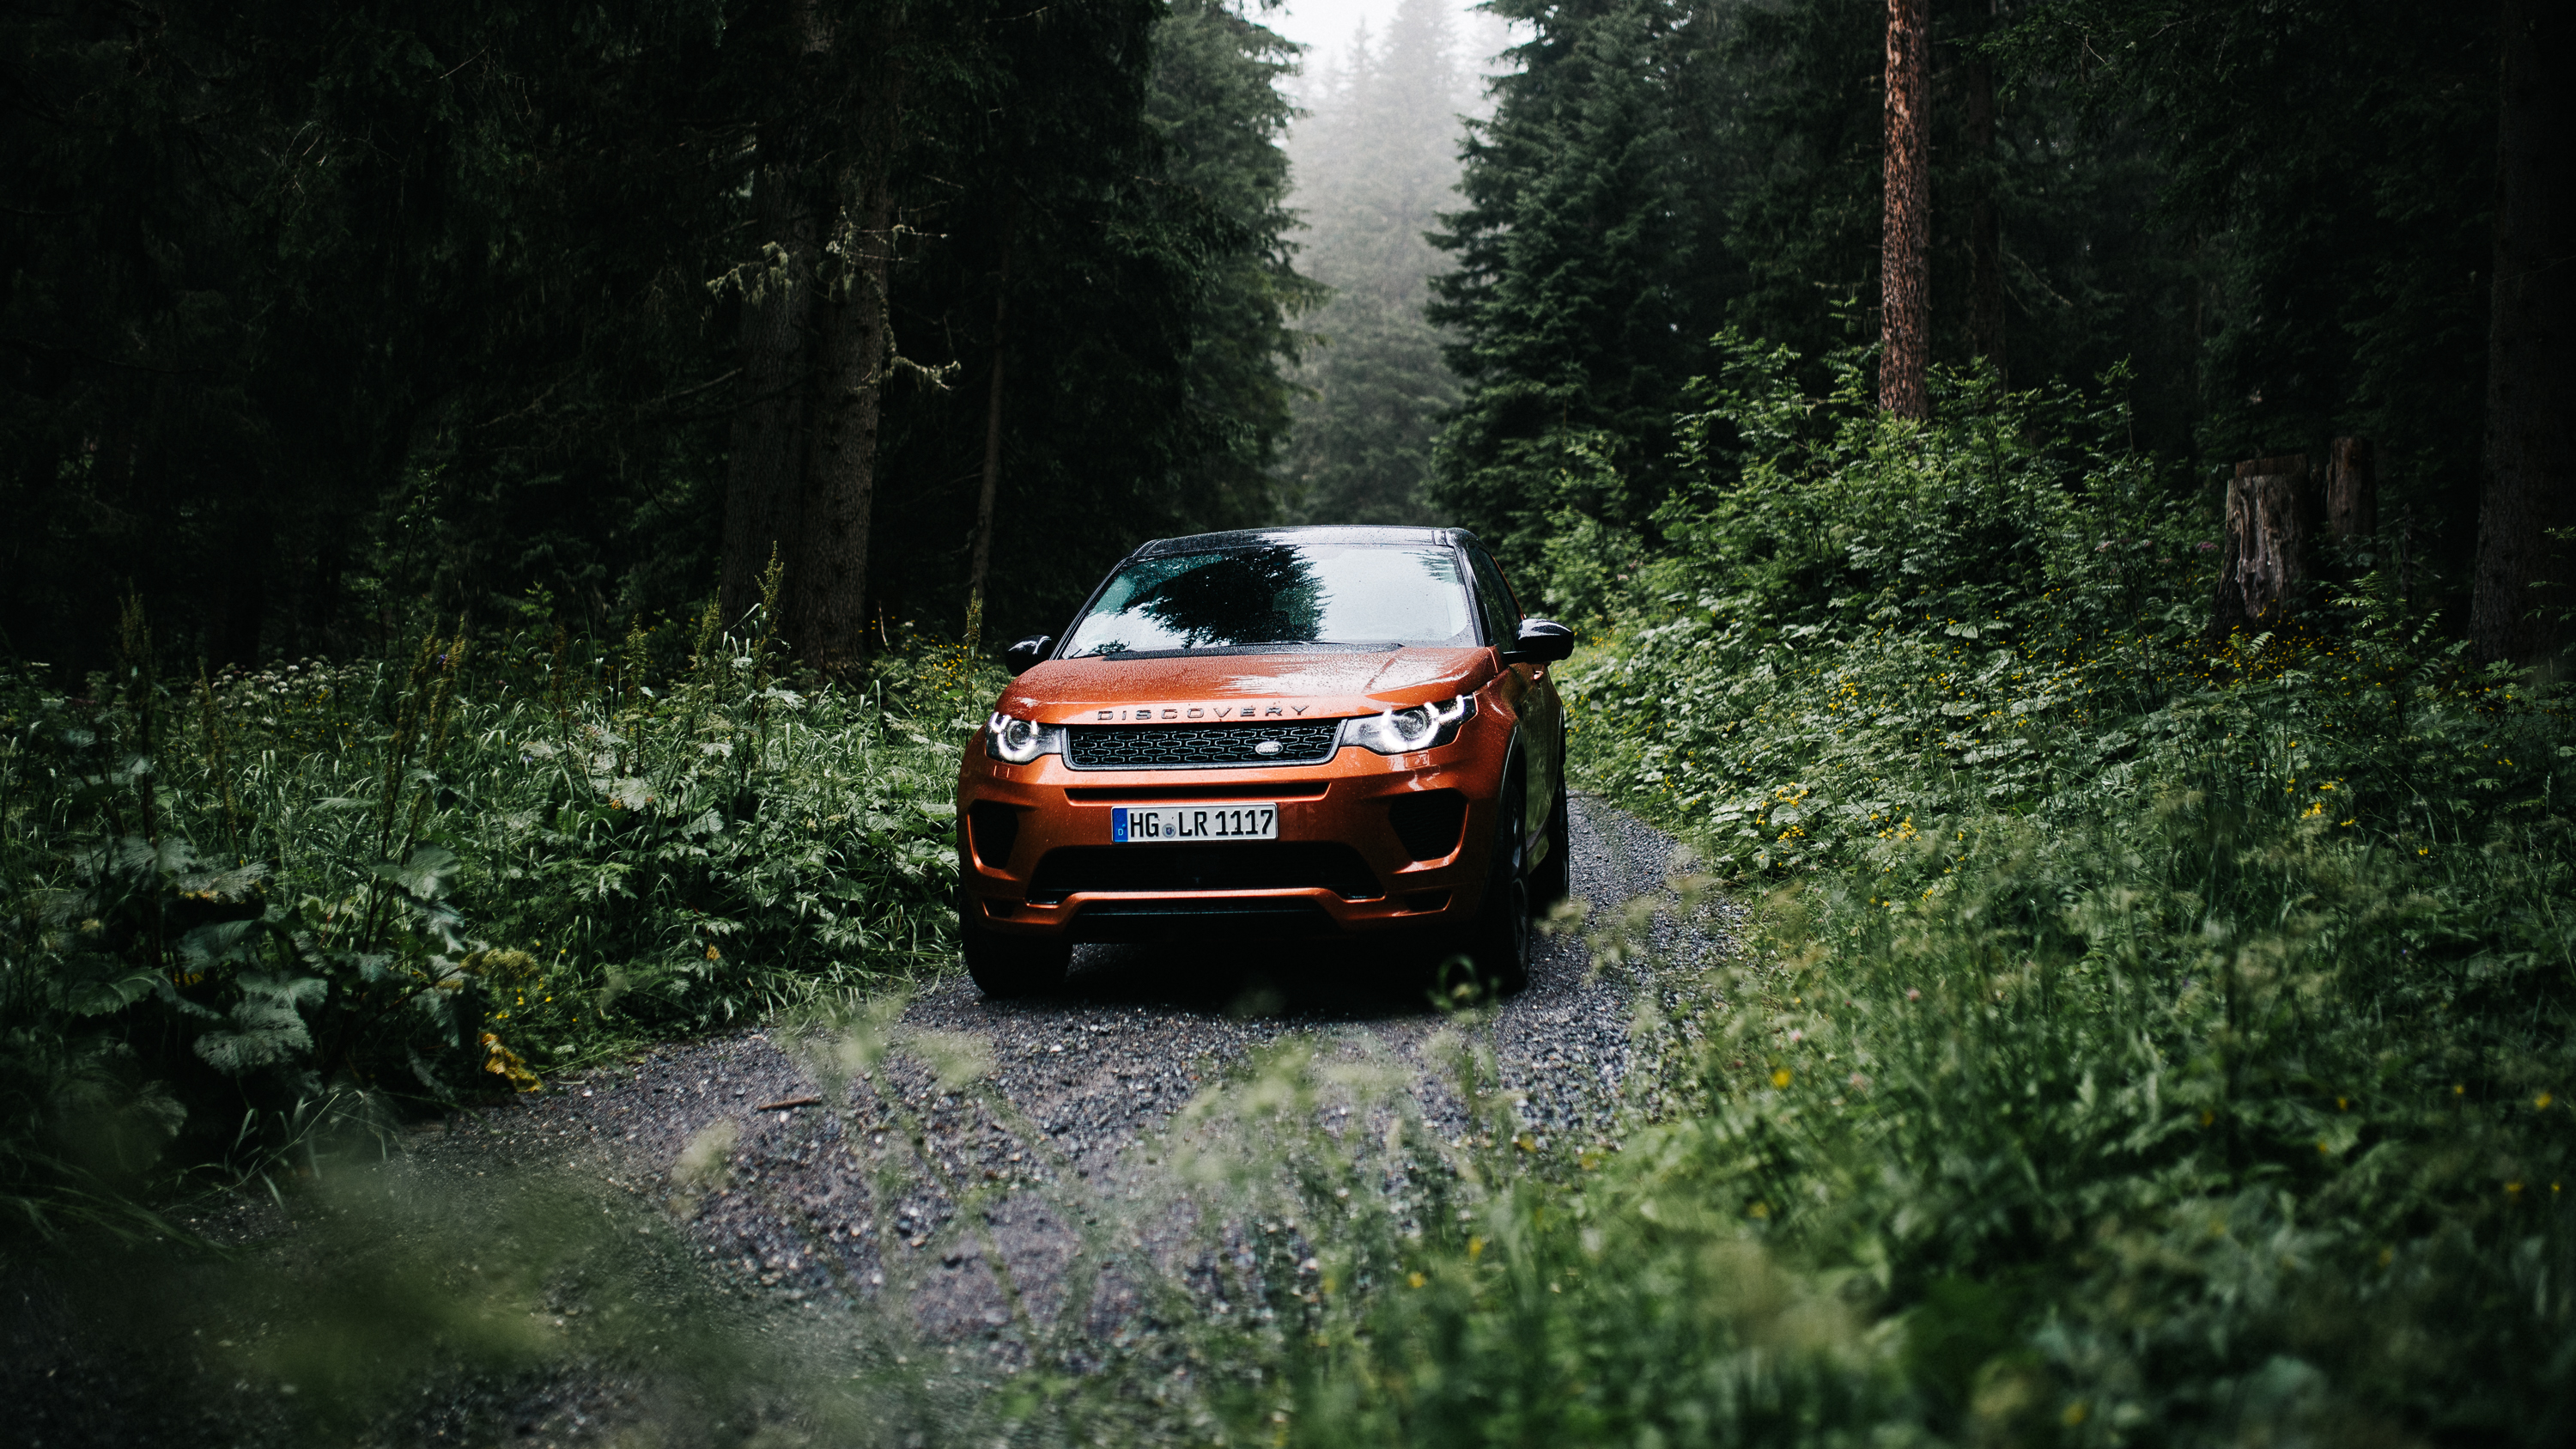 Vehicle Land Rover Car Landscape Forest Tree Bark Road Trees 3000x1687